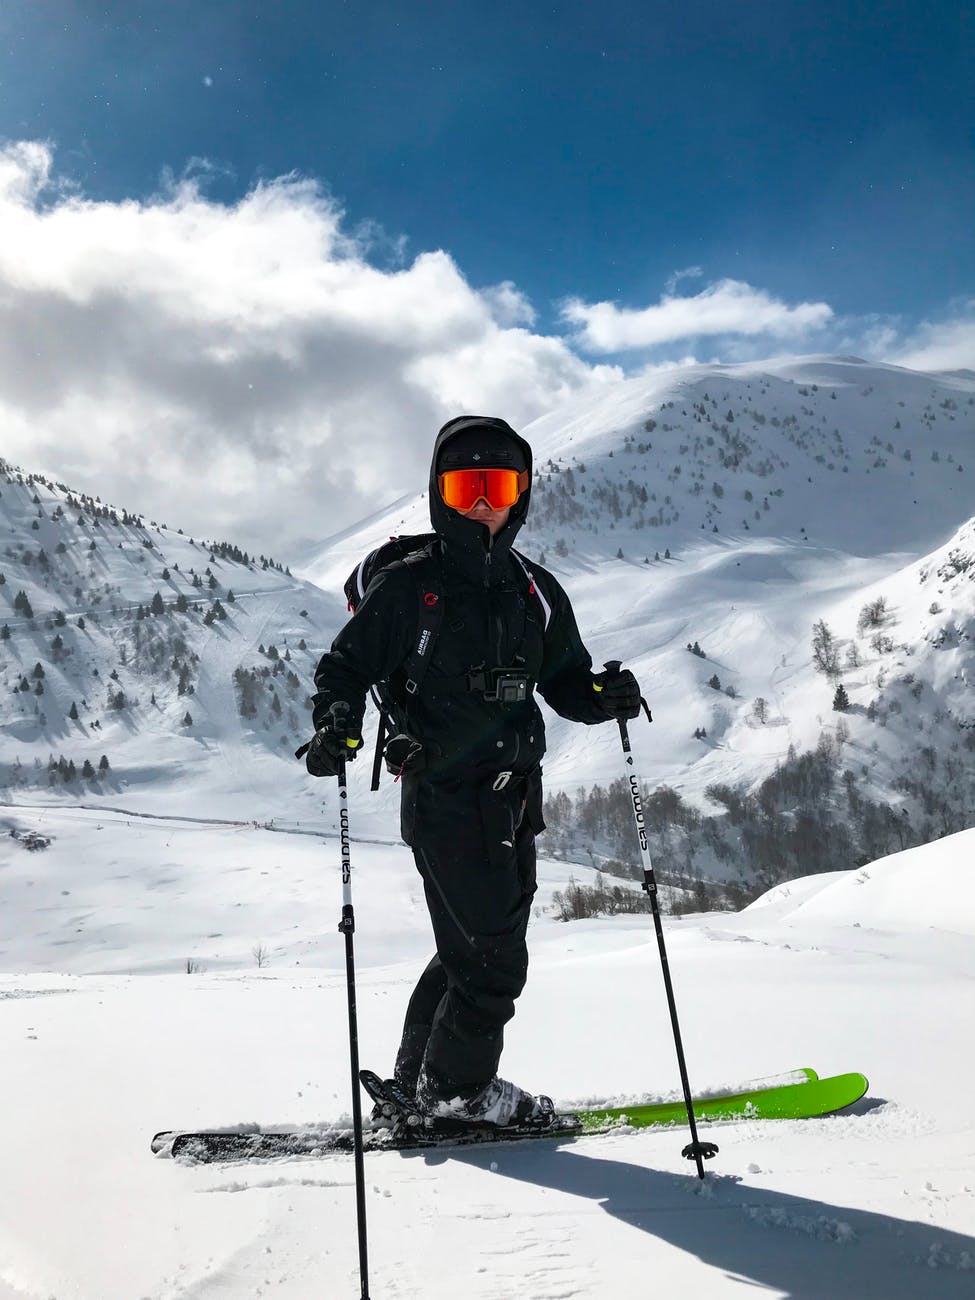 A person wearing black snowsuit and skies